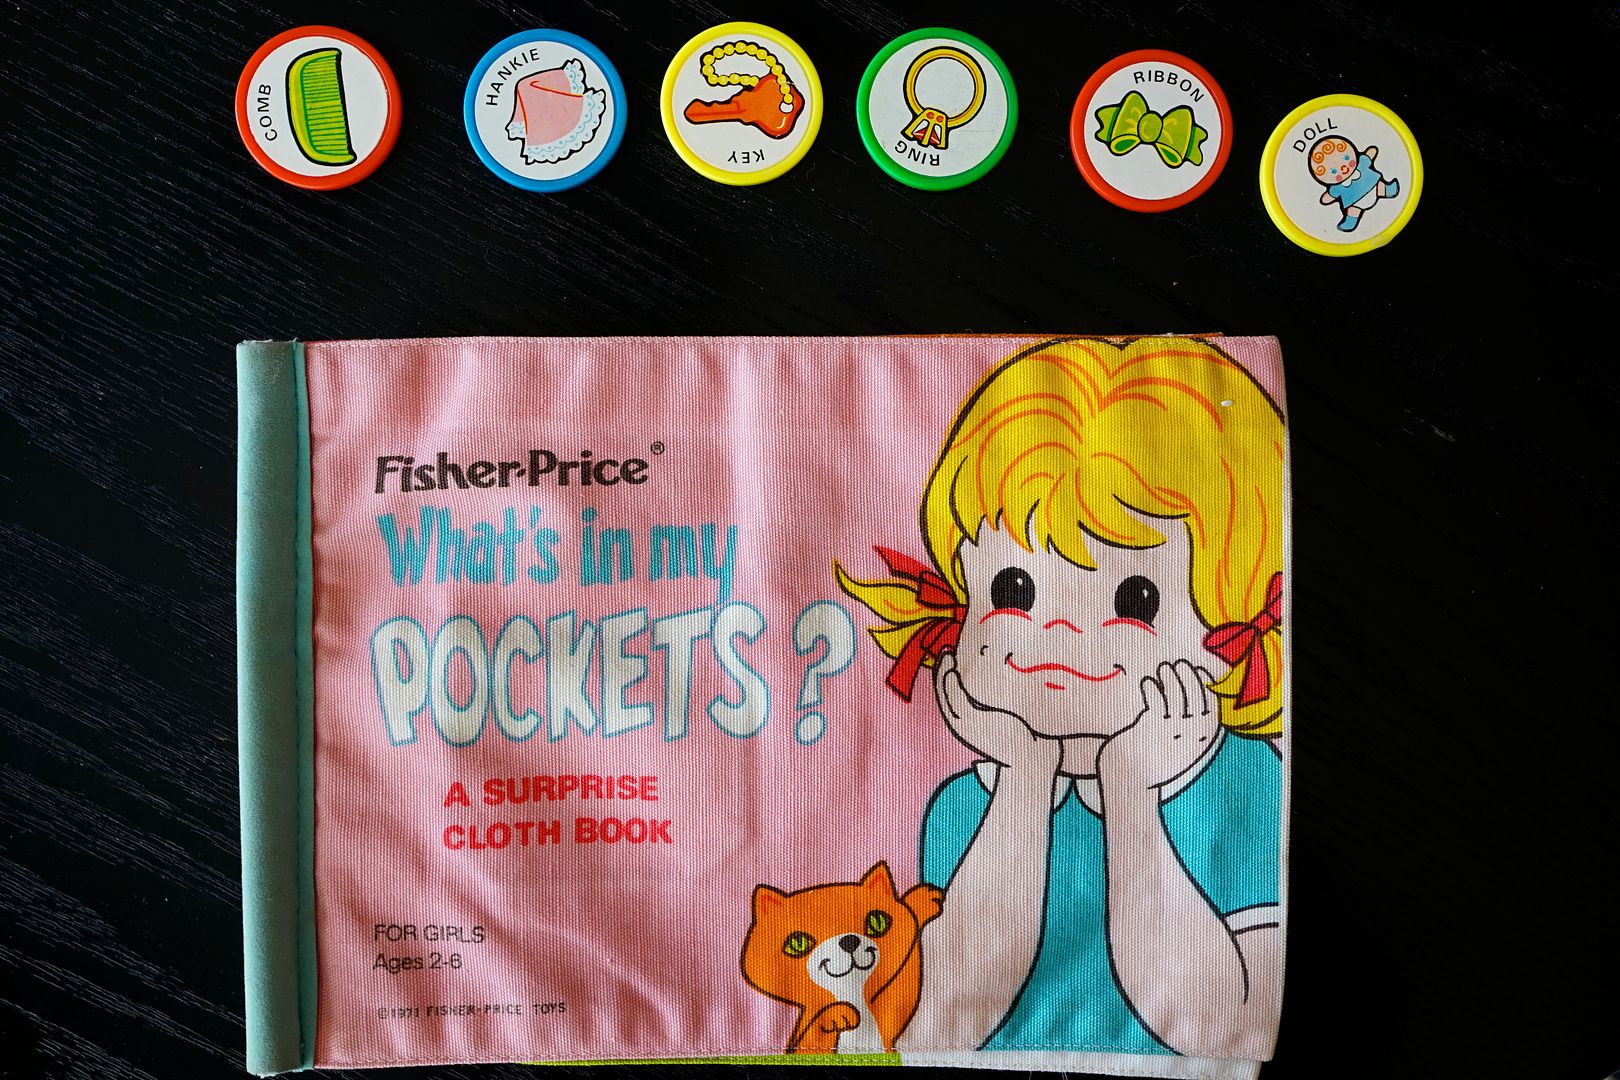 Anne S Odds And Ends Fisher Price Friday What S In My Pockets A Surprise Cloth Book